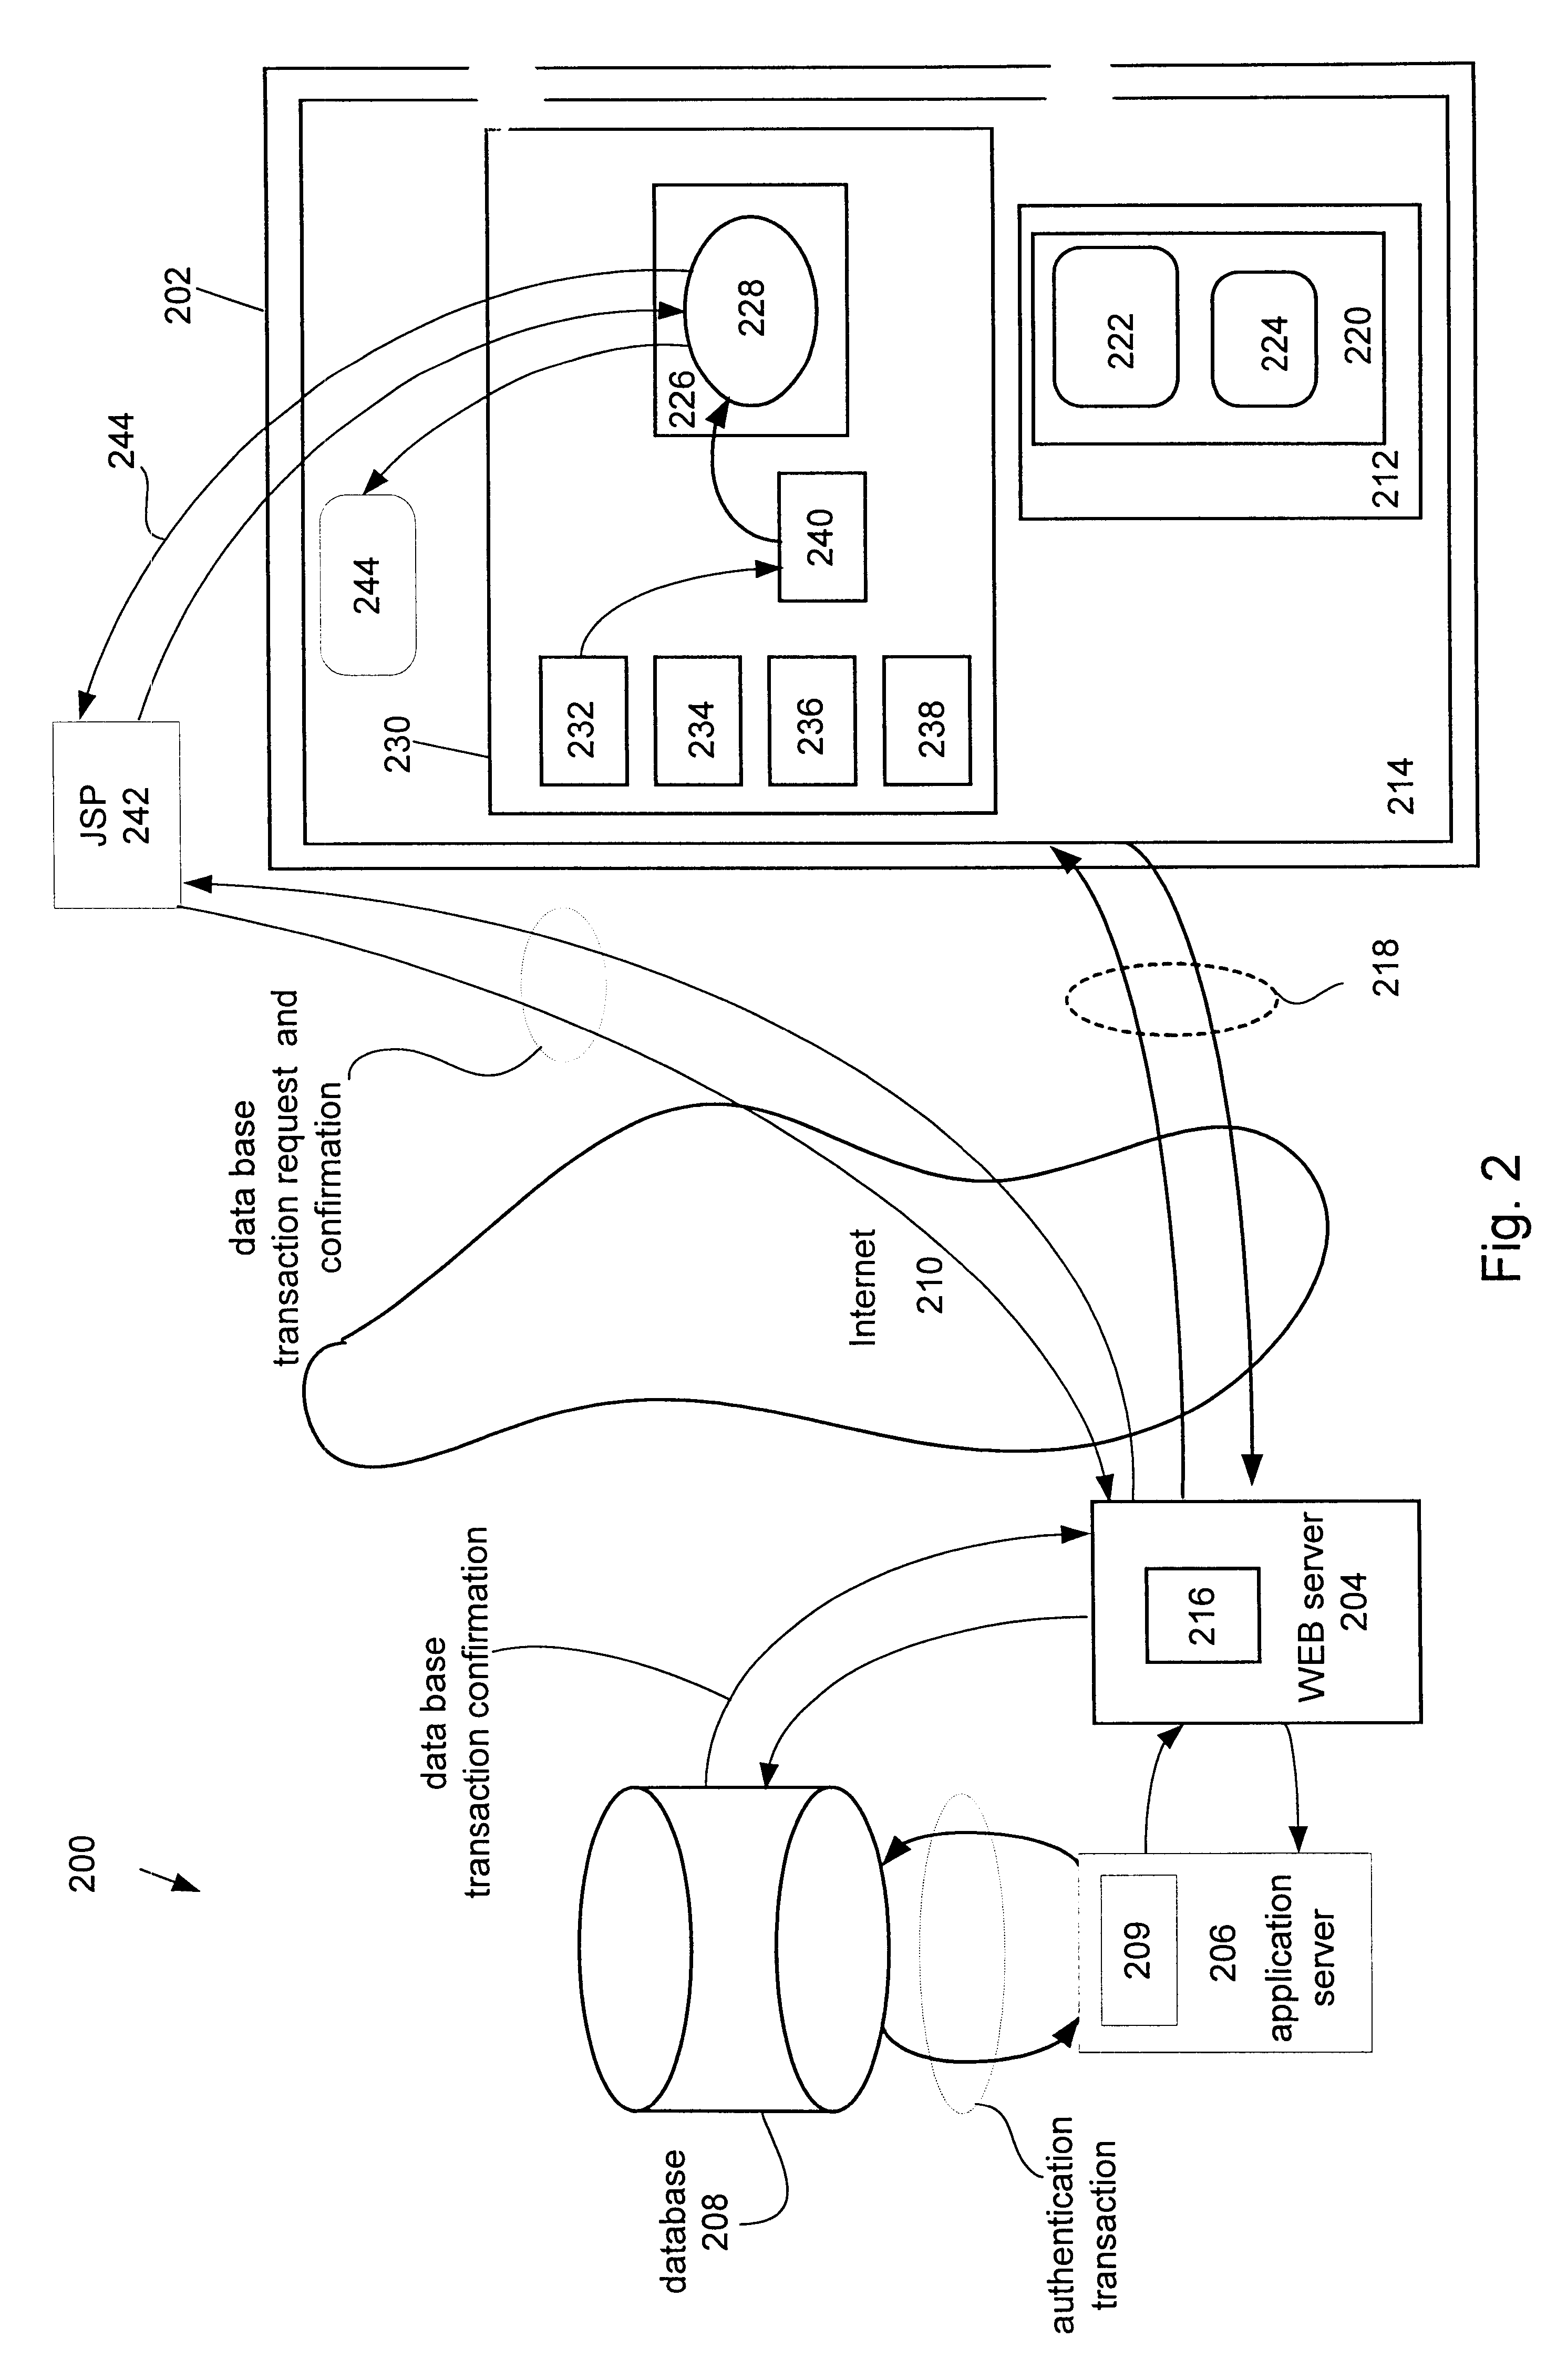 Method and apparatus for providing a highly interactive transaction environment in a distributed network